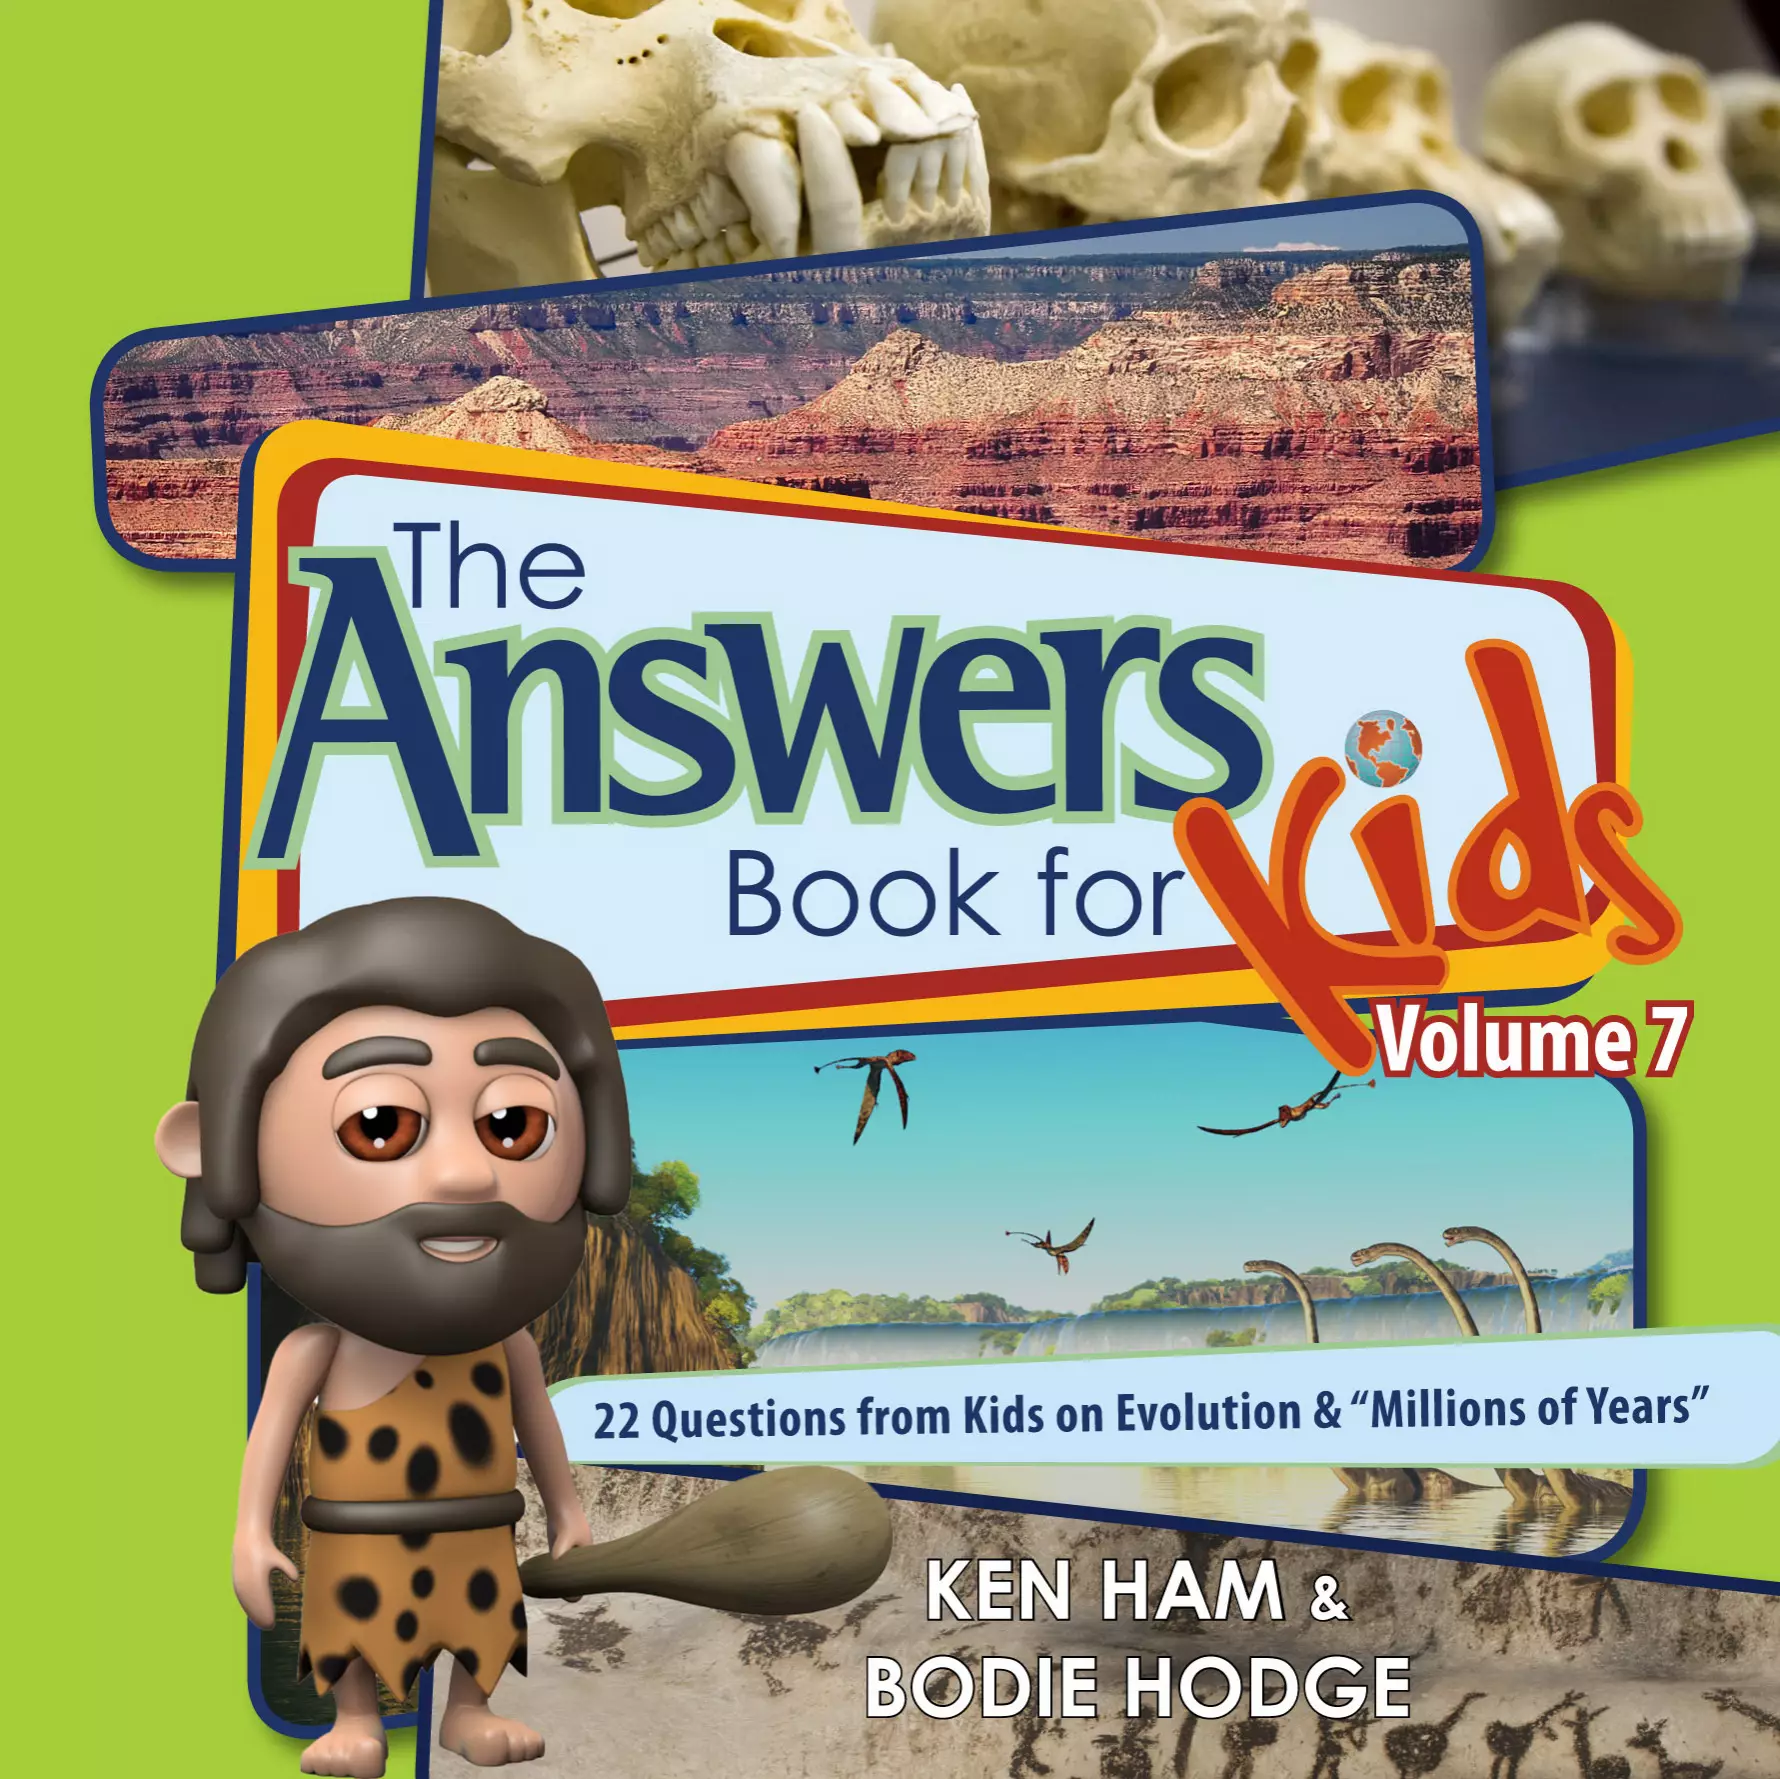 The Answers Book For Kids Volume 7